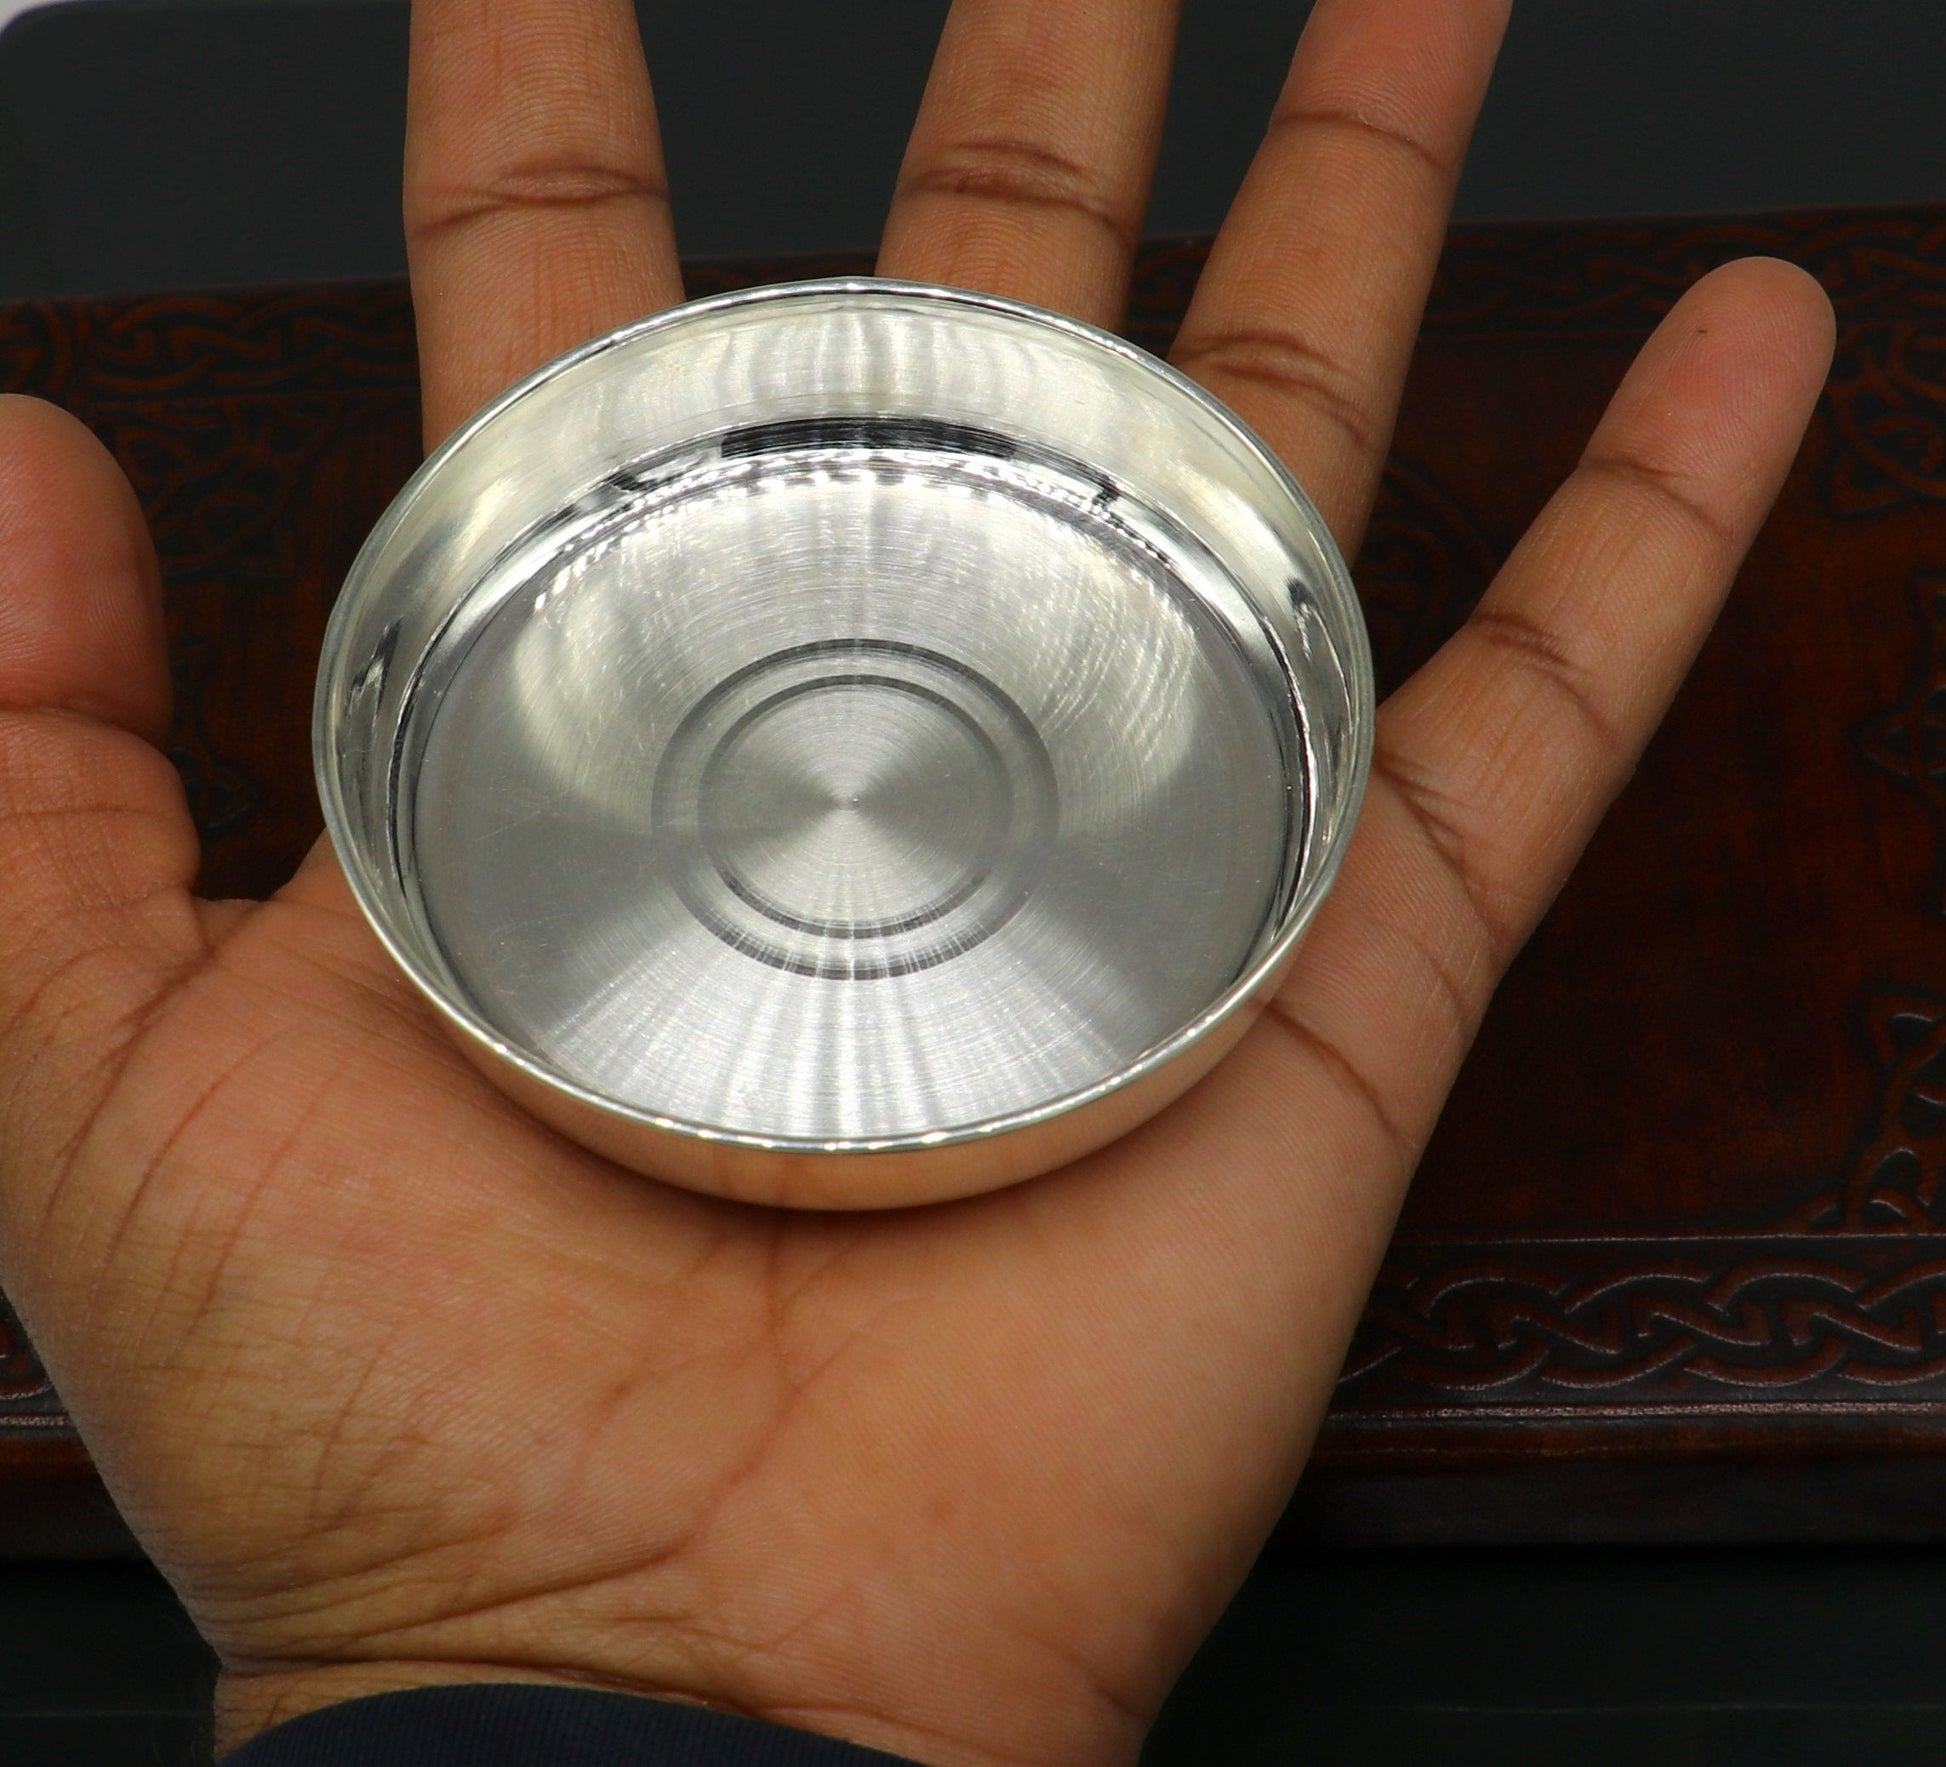 999 fine silver handmade solid plate/ tray, best gifting baby set for baby food, silver utensils, silver articles, puja utensils sv117 - TRIBAL ORNAMENTS